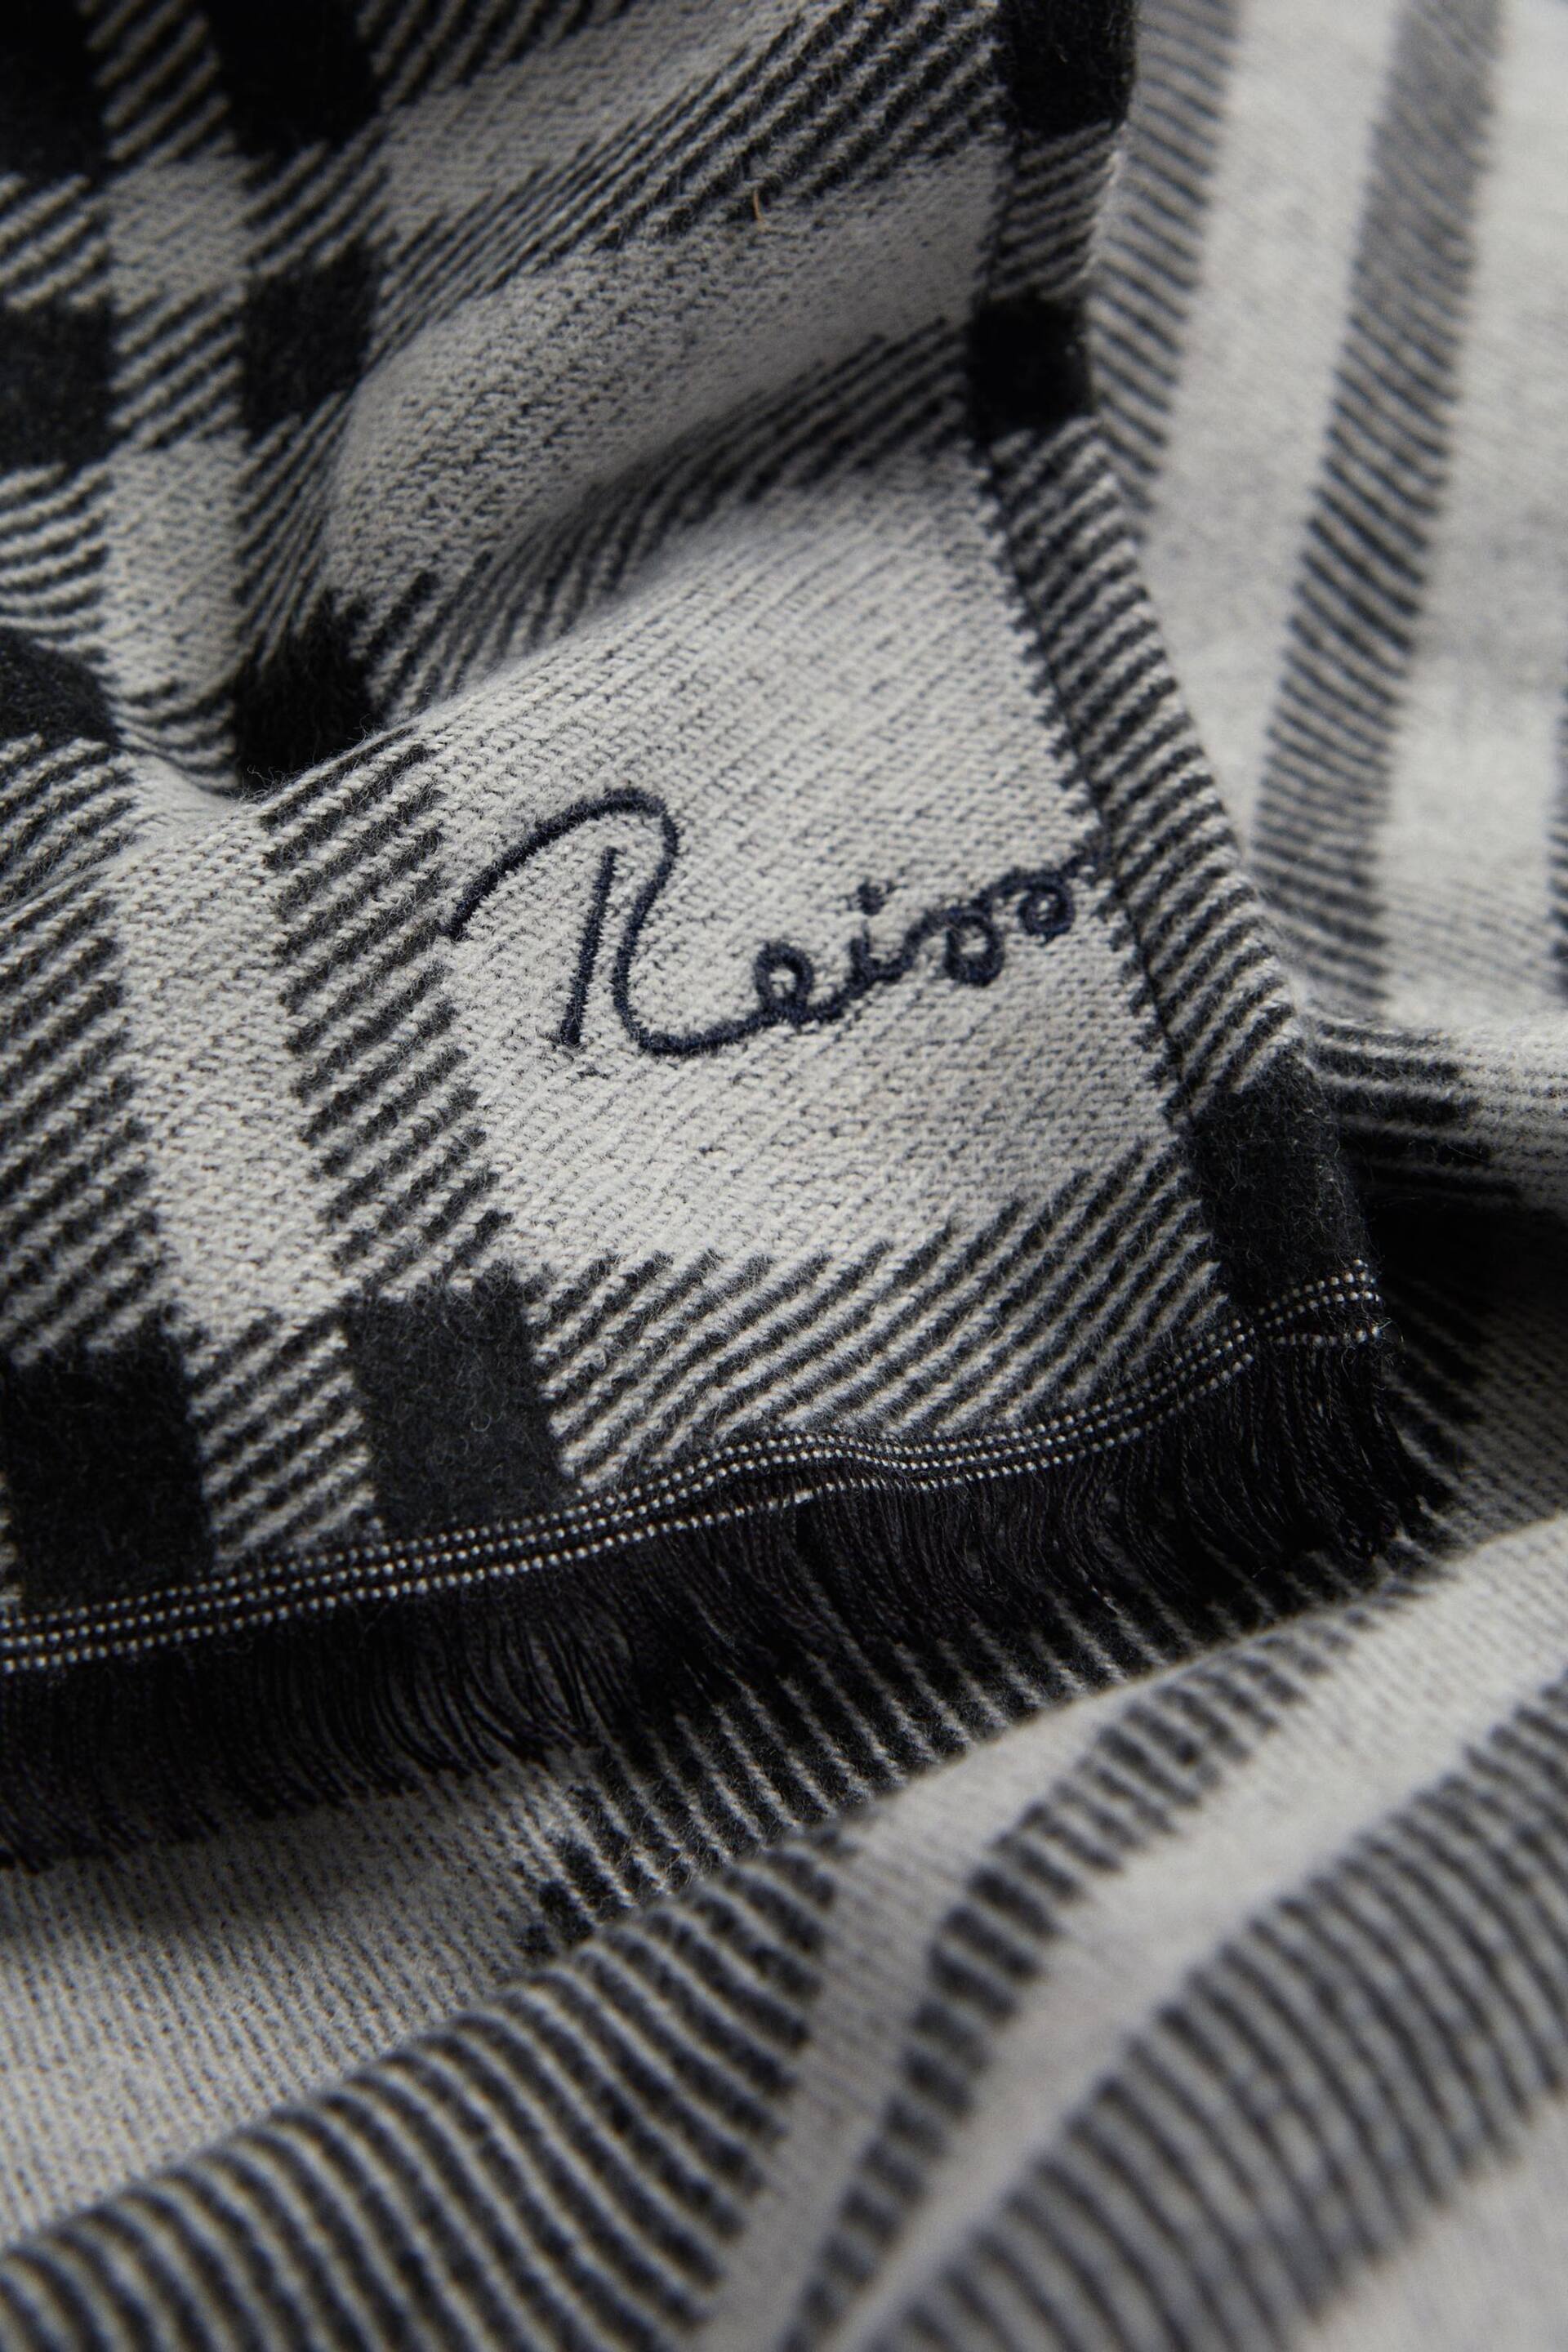 Reiss Black/White Clara Checked Embroidered Scarf - Image 4 of 4